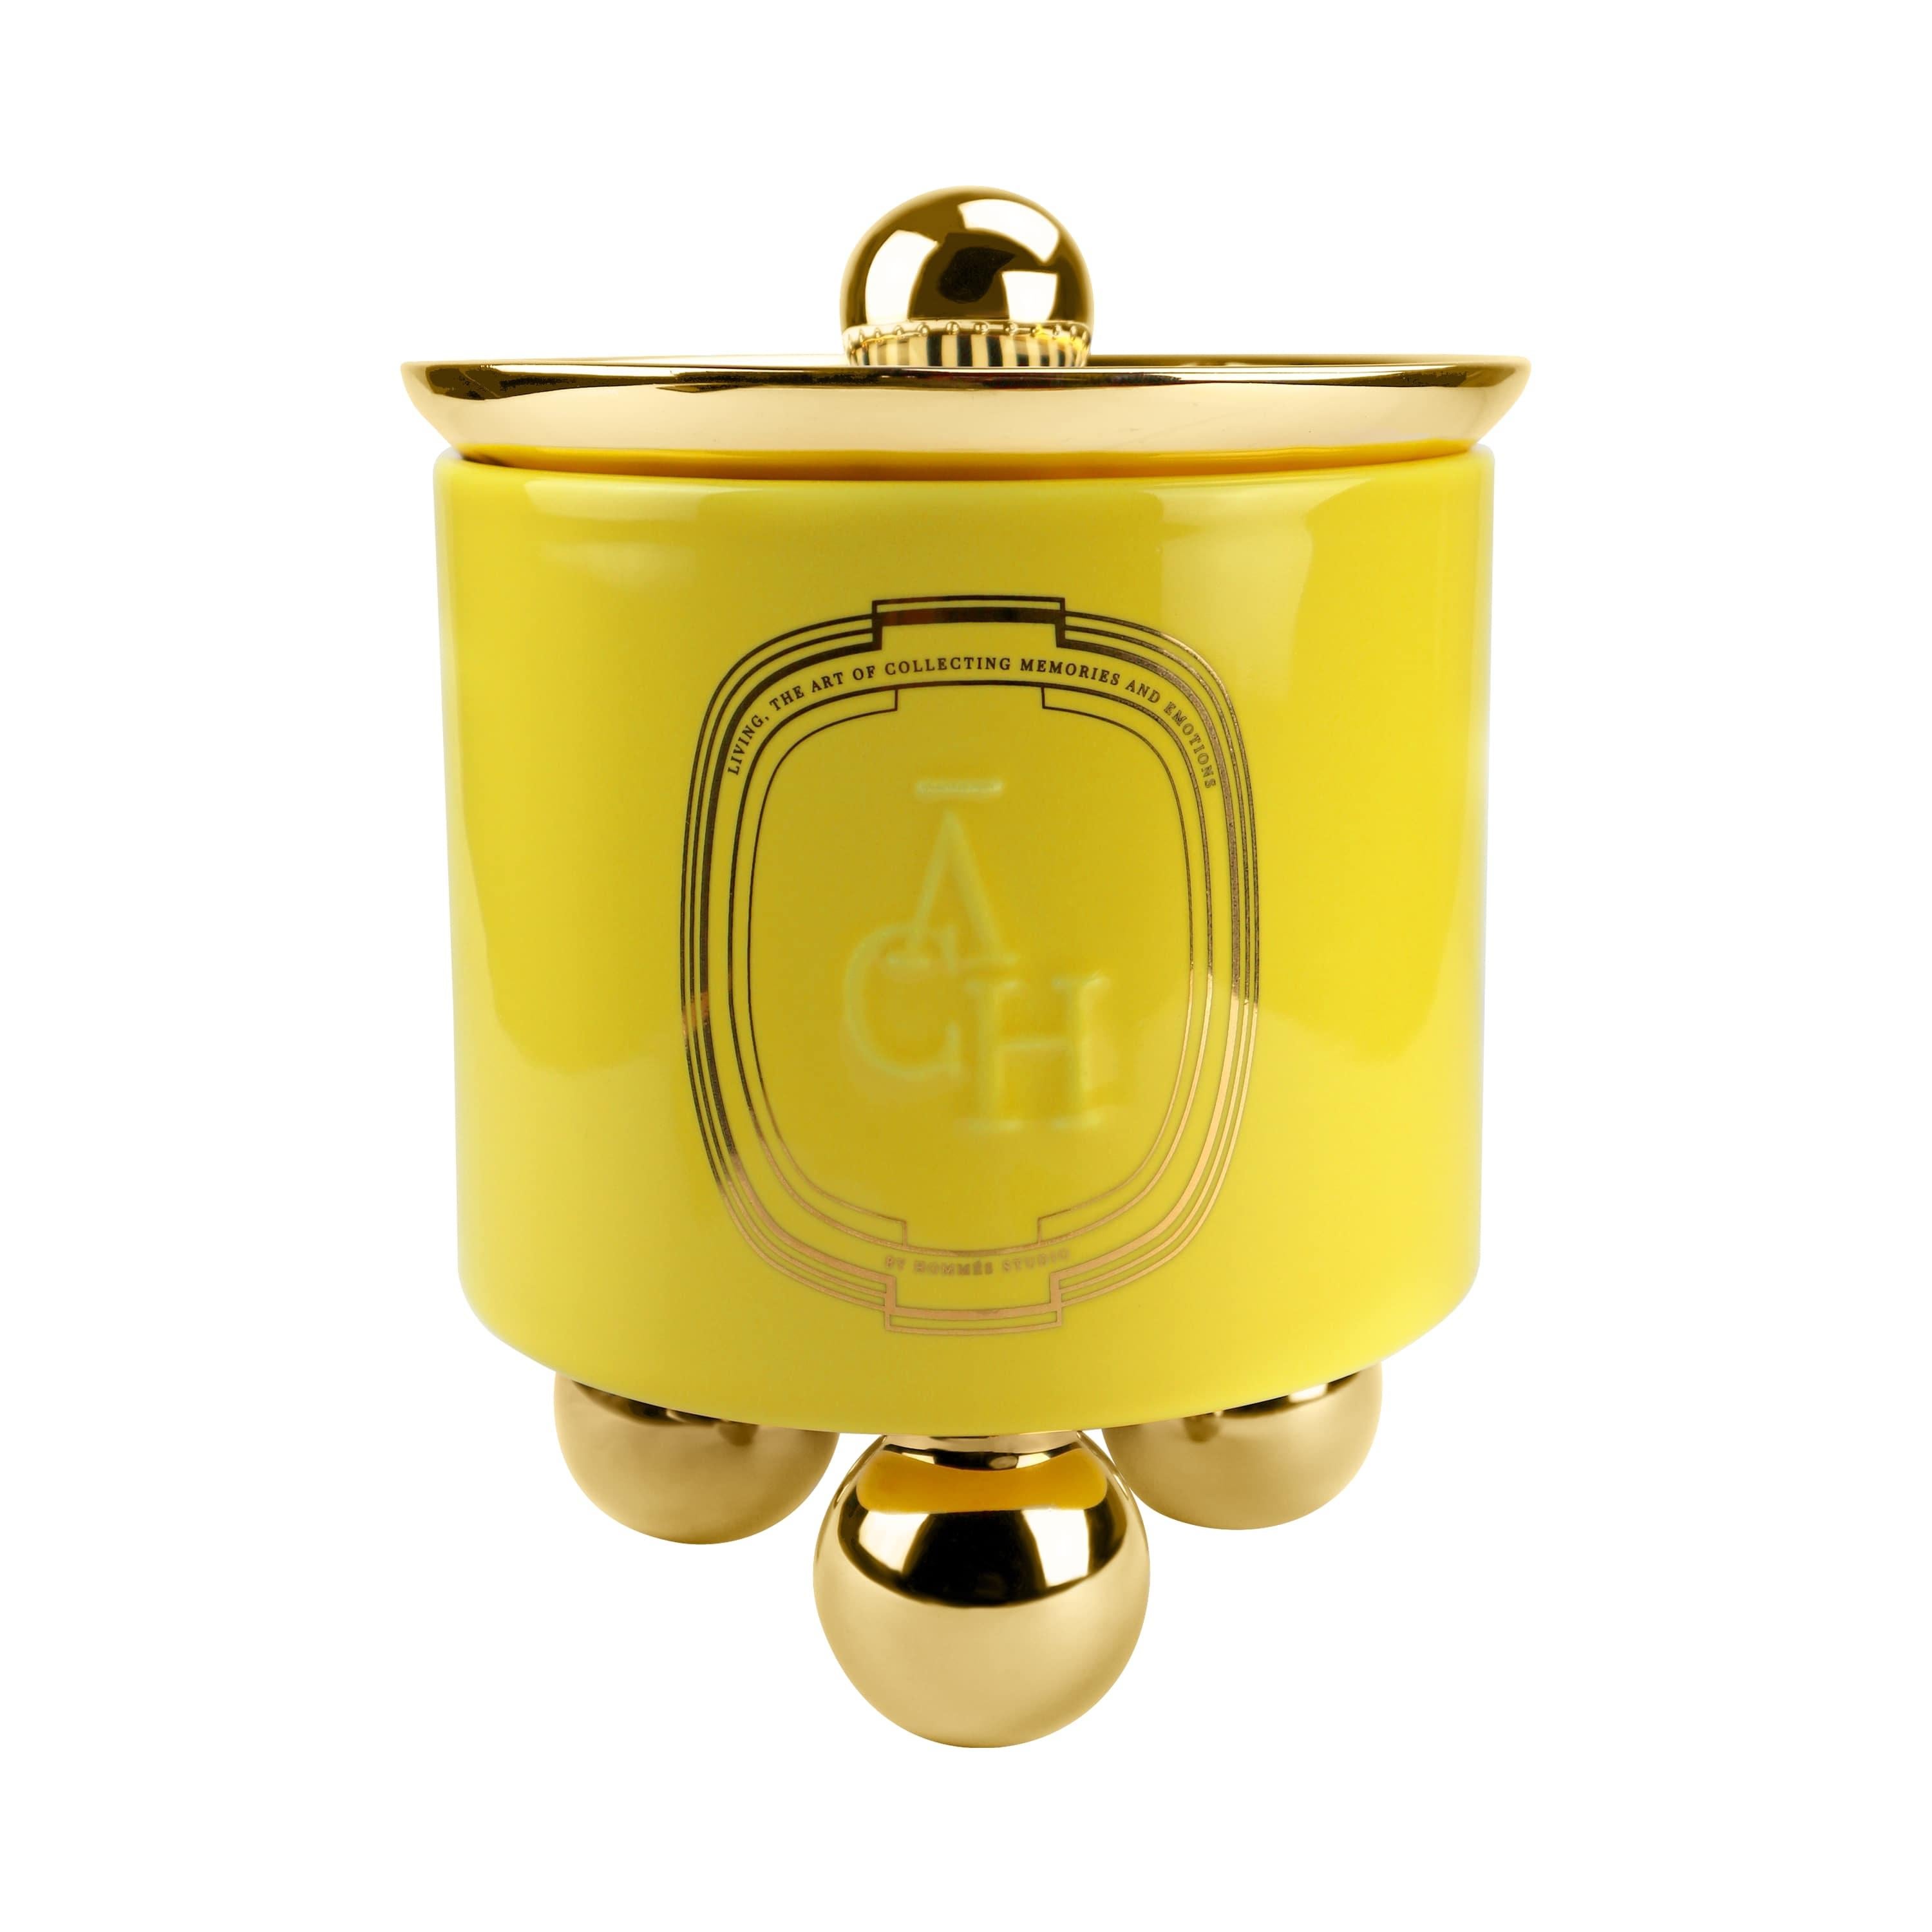 Candle Fig Amber Scented, Yellow Ceramic Candleholder Natural Fragrance, In Stock

Achi candle releases a hypnotic perfume adding extra value to a space thanks to its eye-catching container design. The natural composition of scents promises to